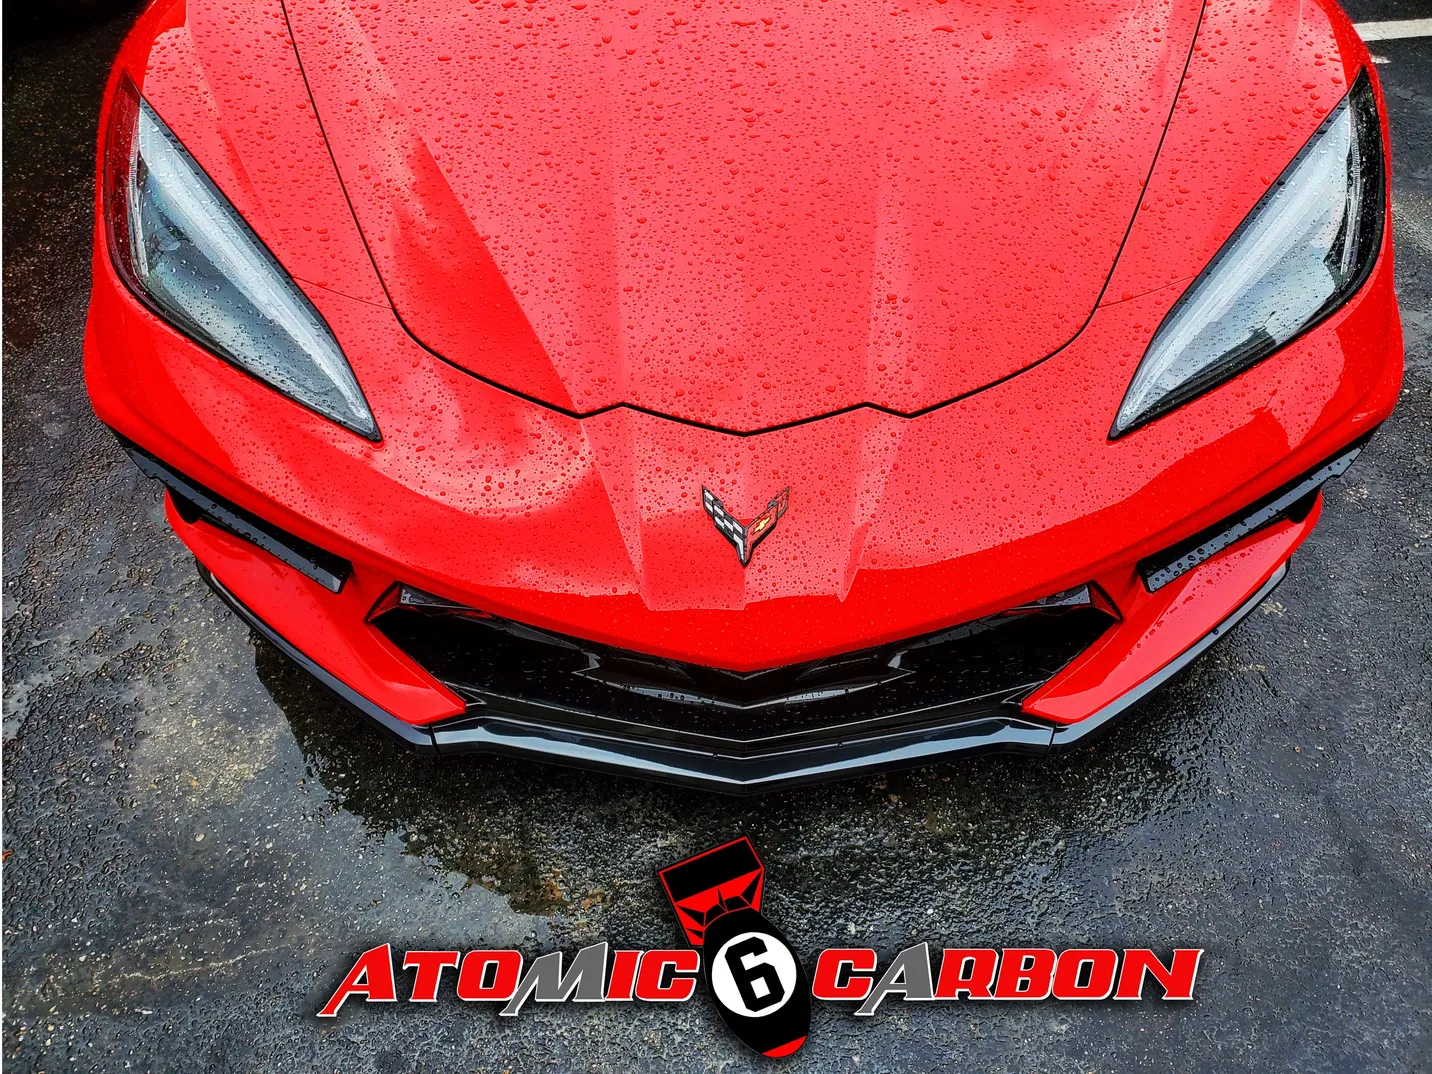 A custom job done on the sports car by Corvette by Atomic Carbon